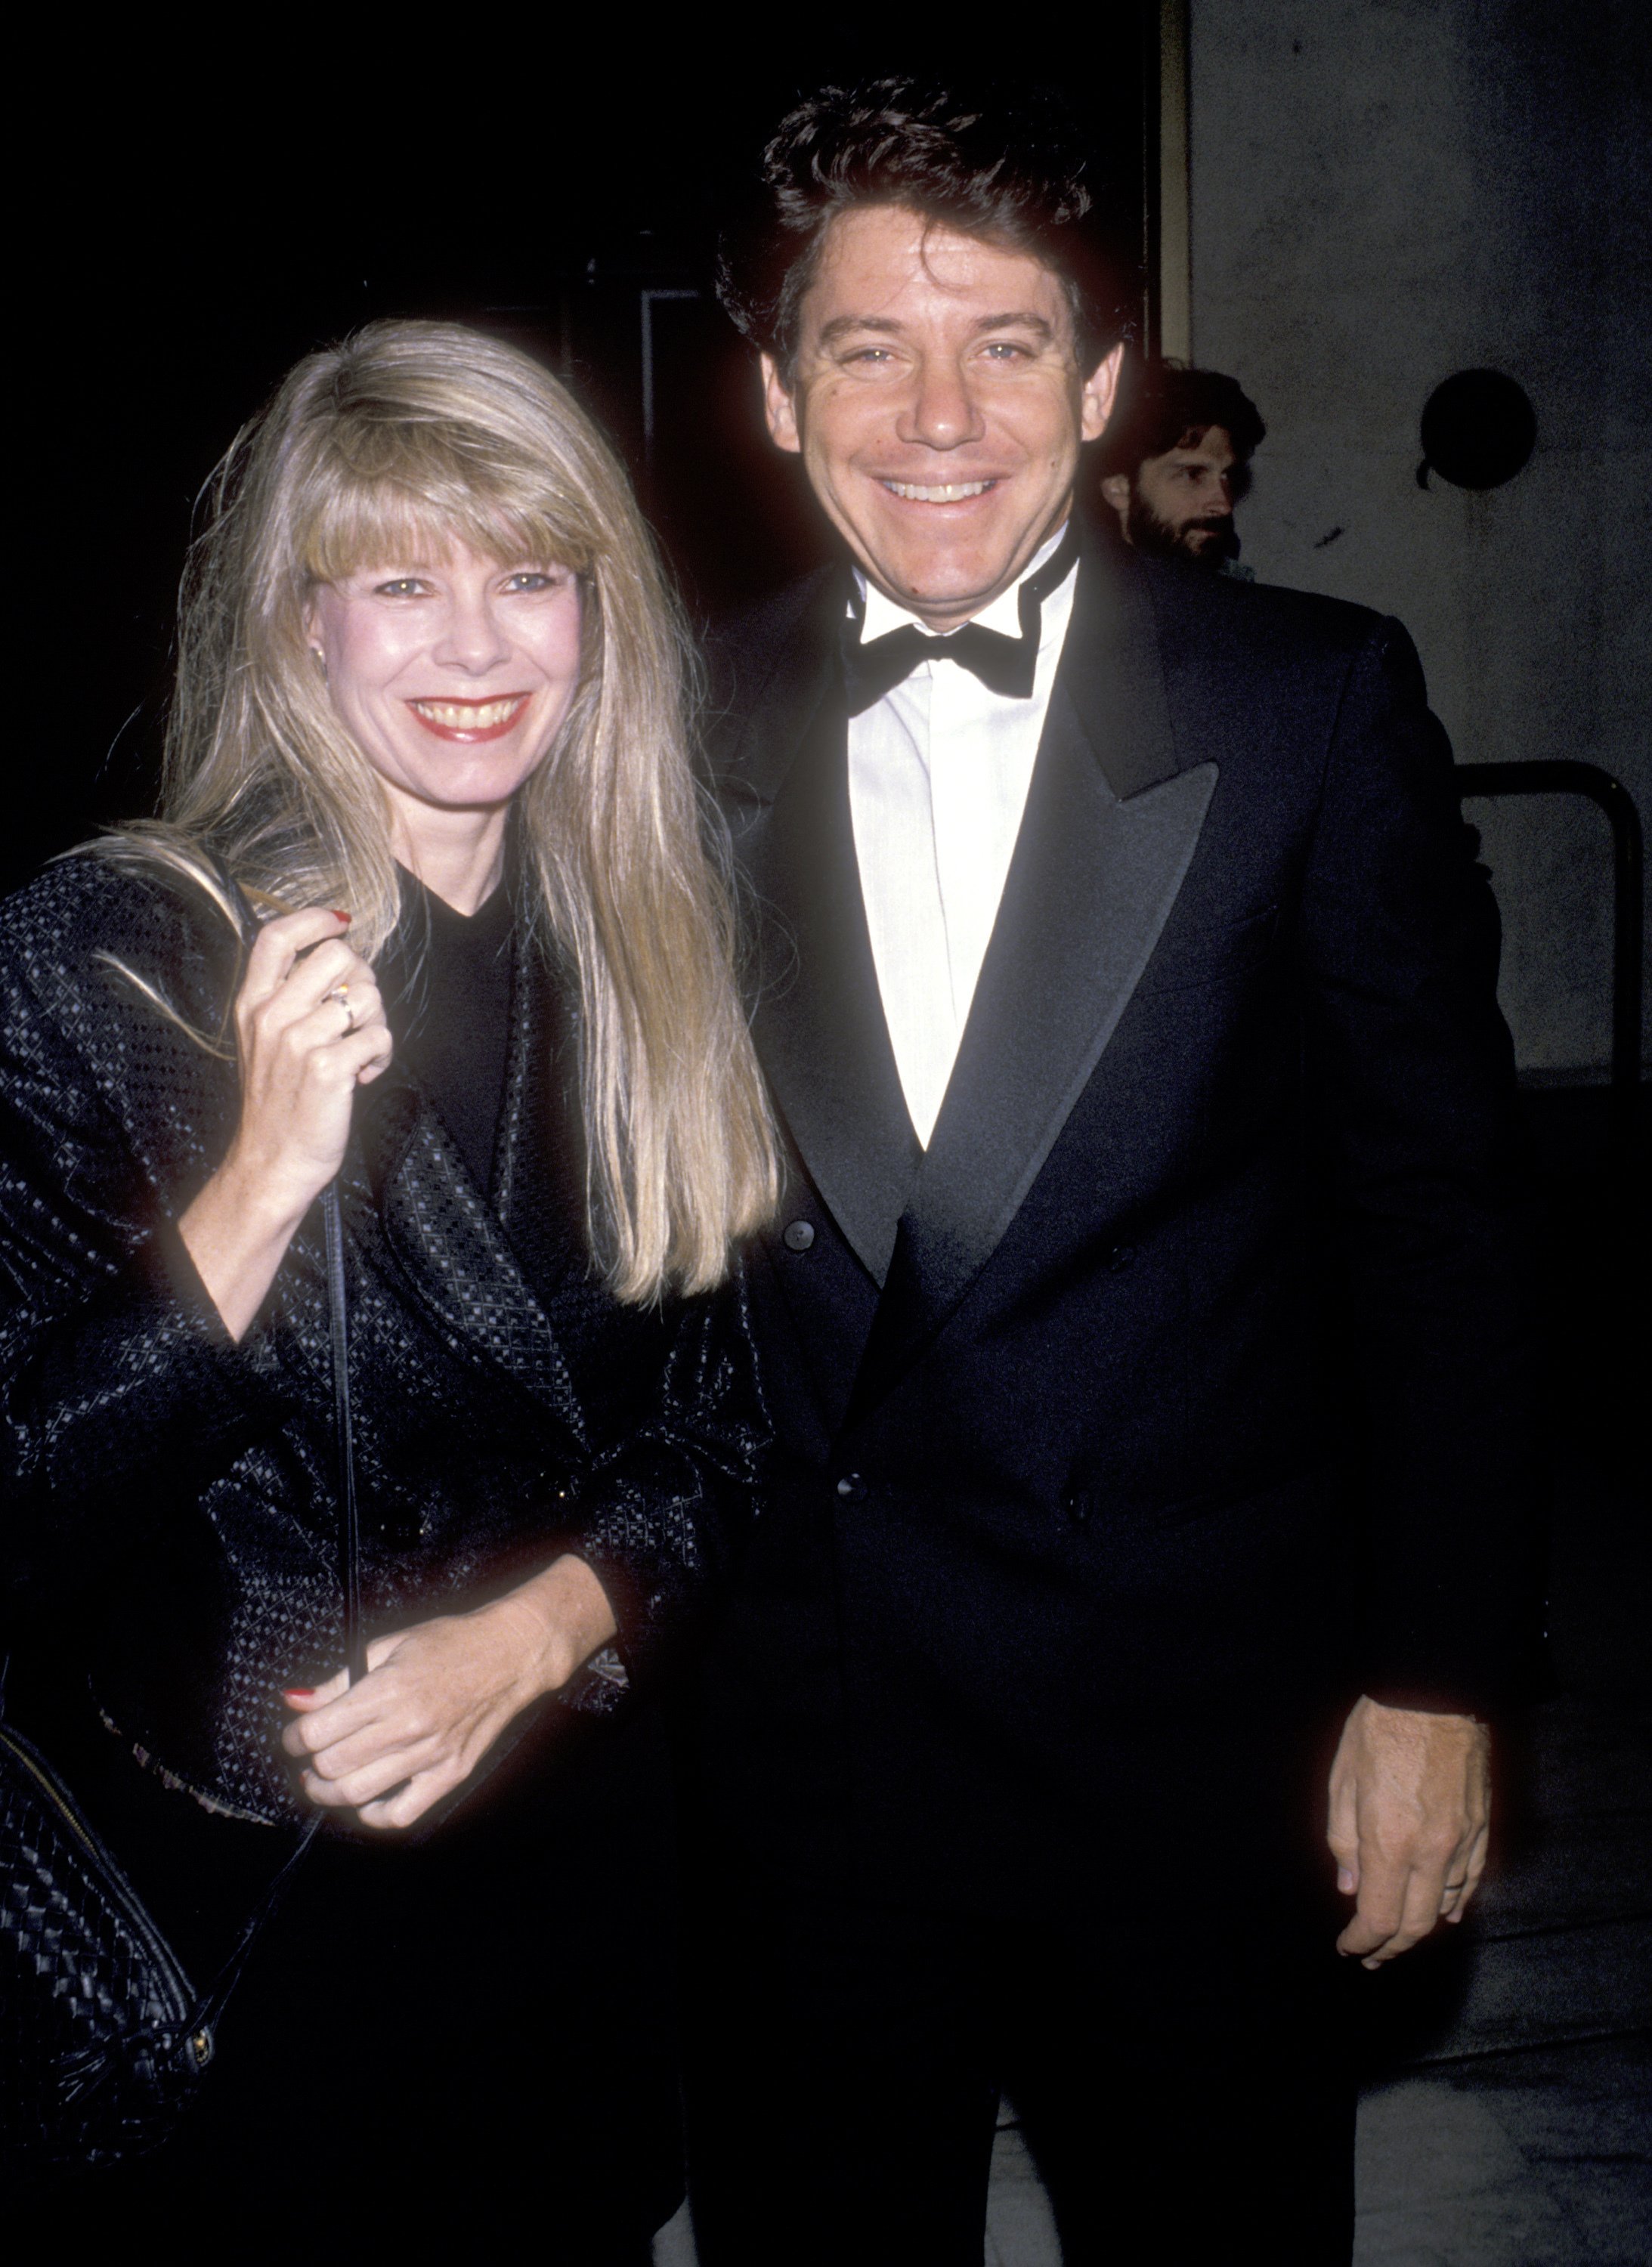 Anson Williams and wife Jackie Gerken attend The National Conference of Christians and Jews Gala on October 16, 1989, in Los Angeles, California. | Source: Getty Images.